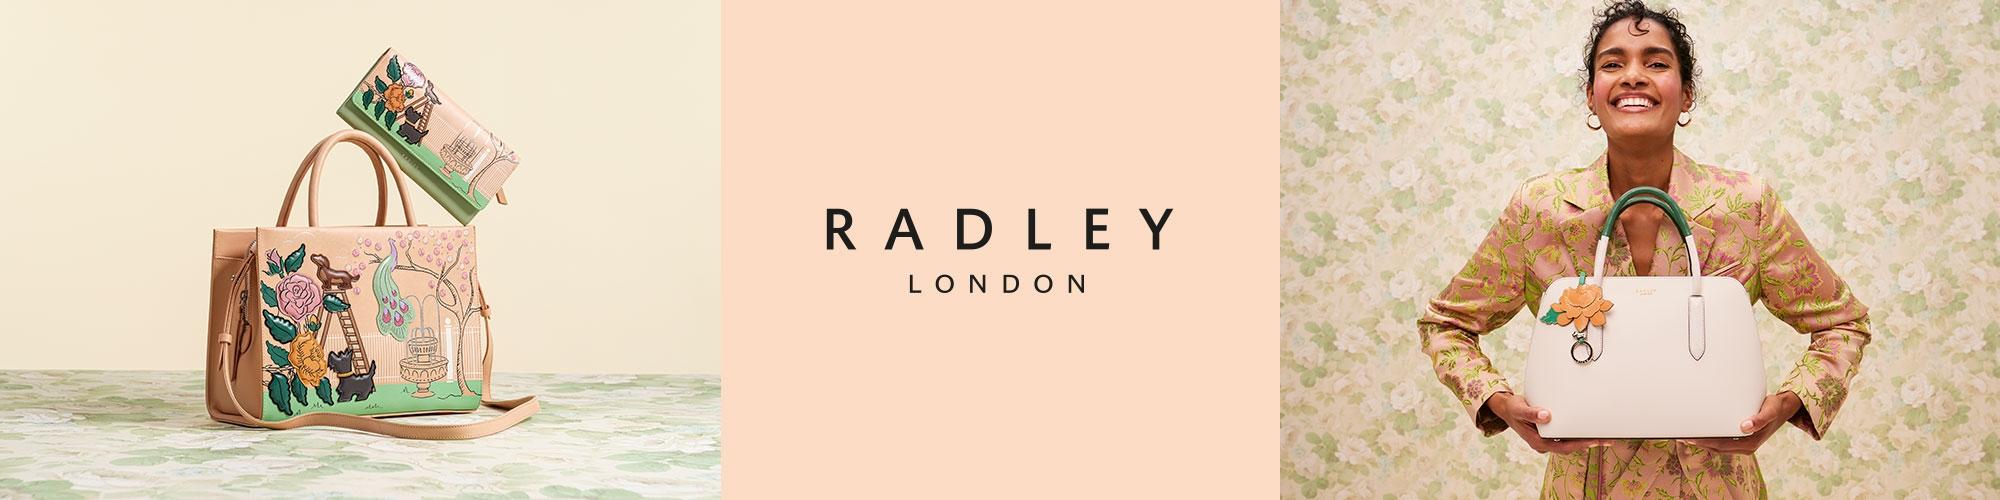 Radley London Get Up And Go - Responsible - Medium Tote In Blue